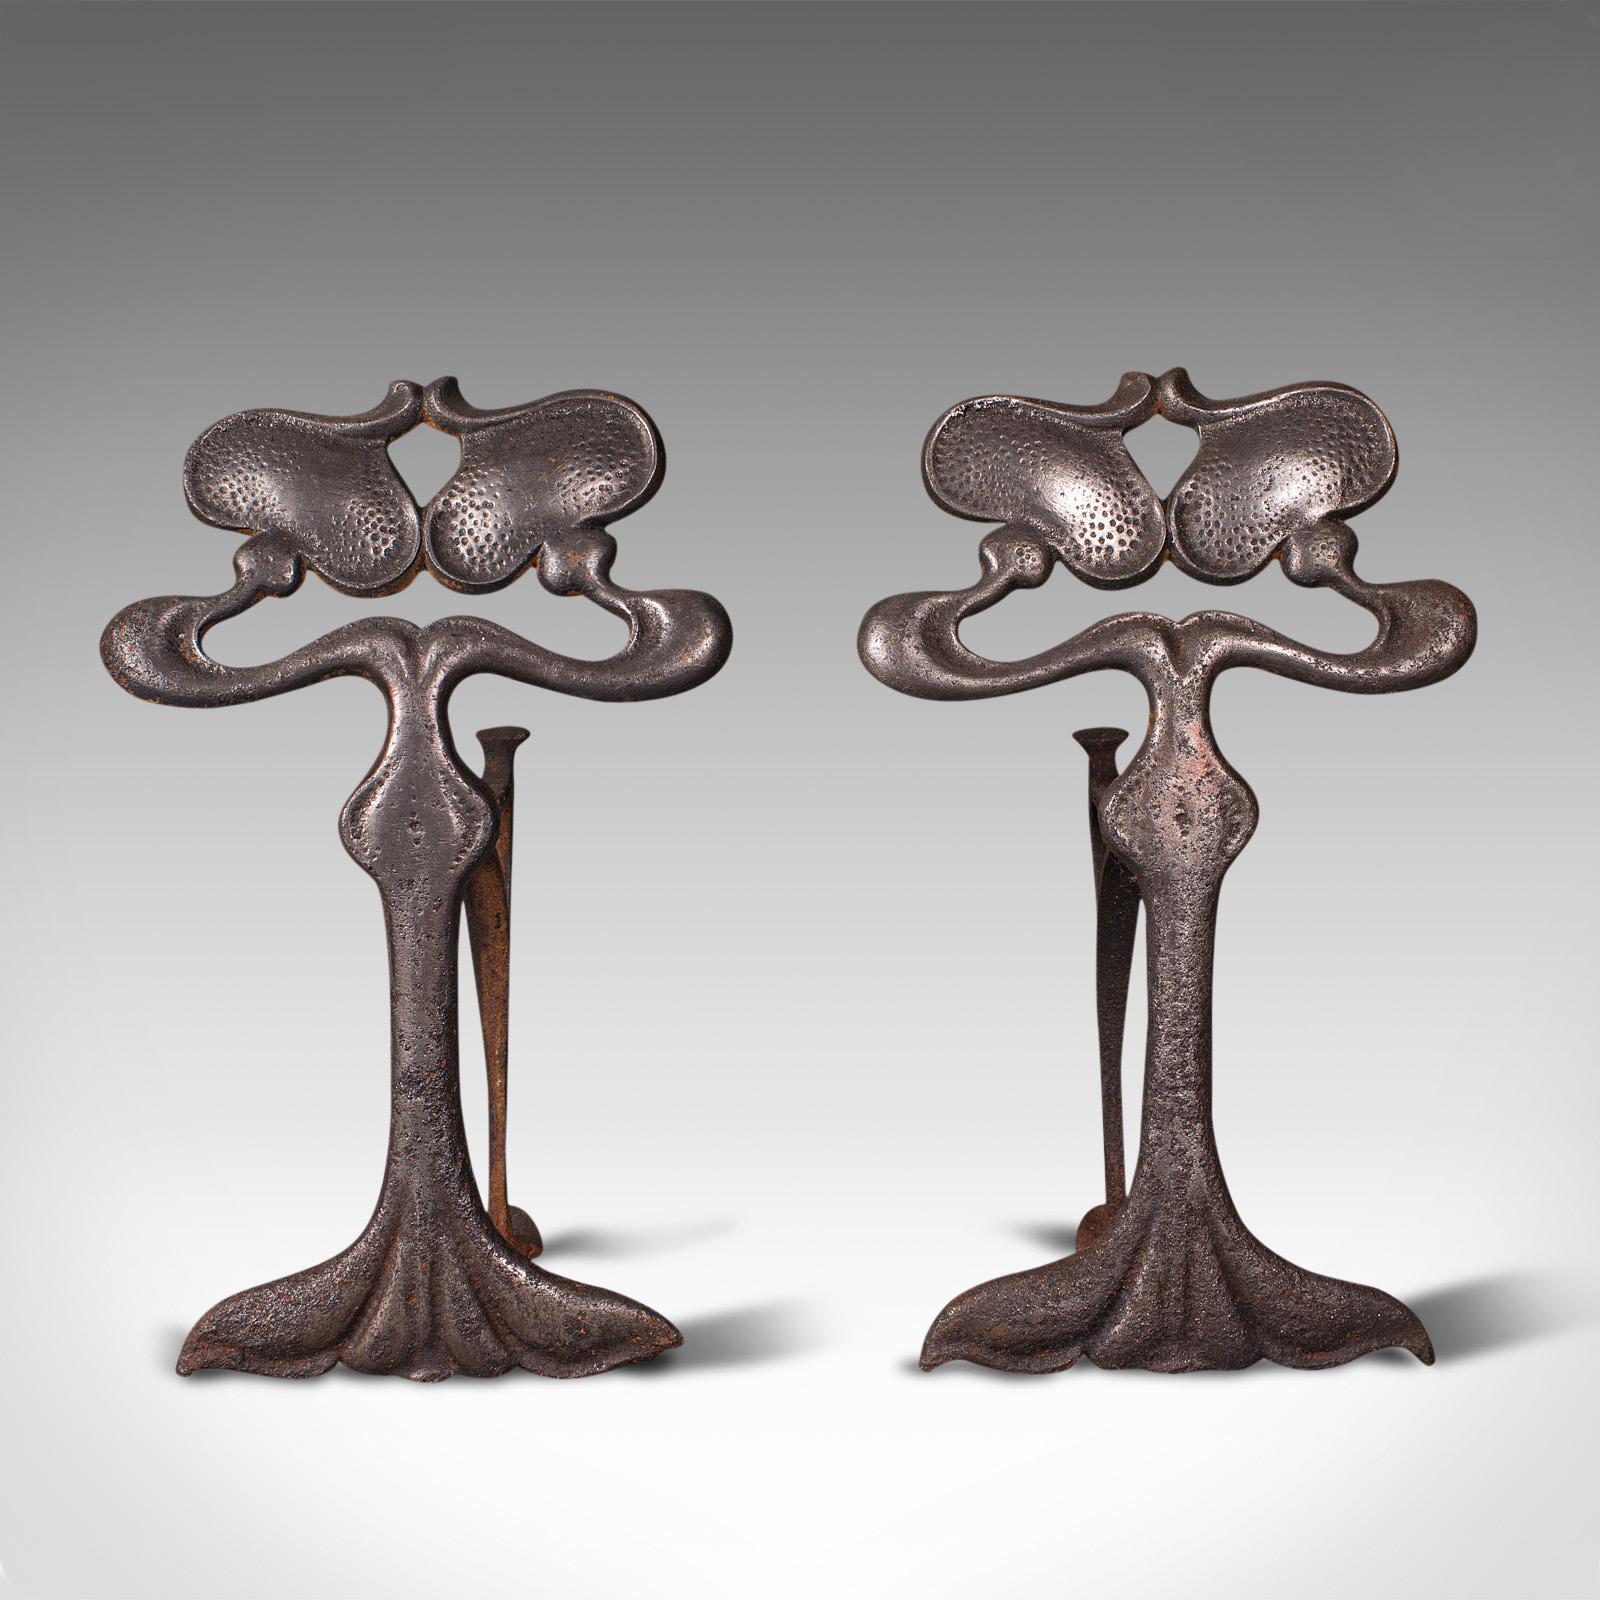 This is a pair of antique andirons. A French, cast iron fireside fire dog or tool rests in Art Nouveau taste, dating to the late 19th century, circa 1900.

Superb and expressive forms in the Art Nouveau manner
Displaying a desirably aged patina